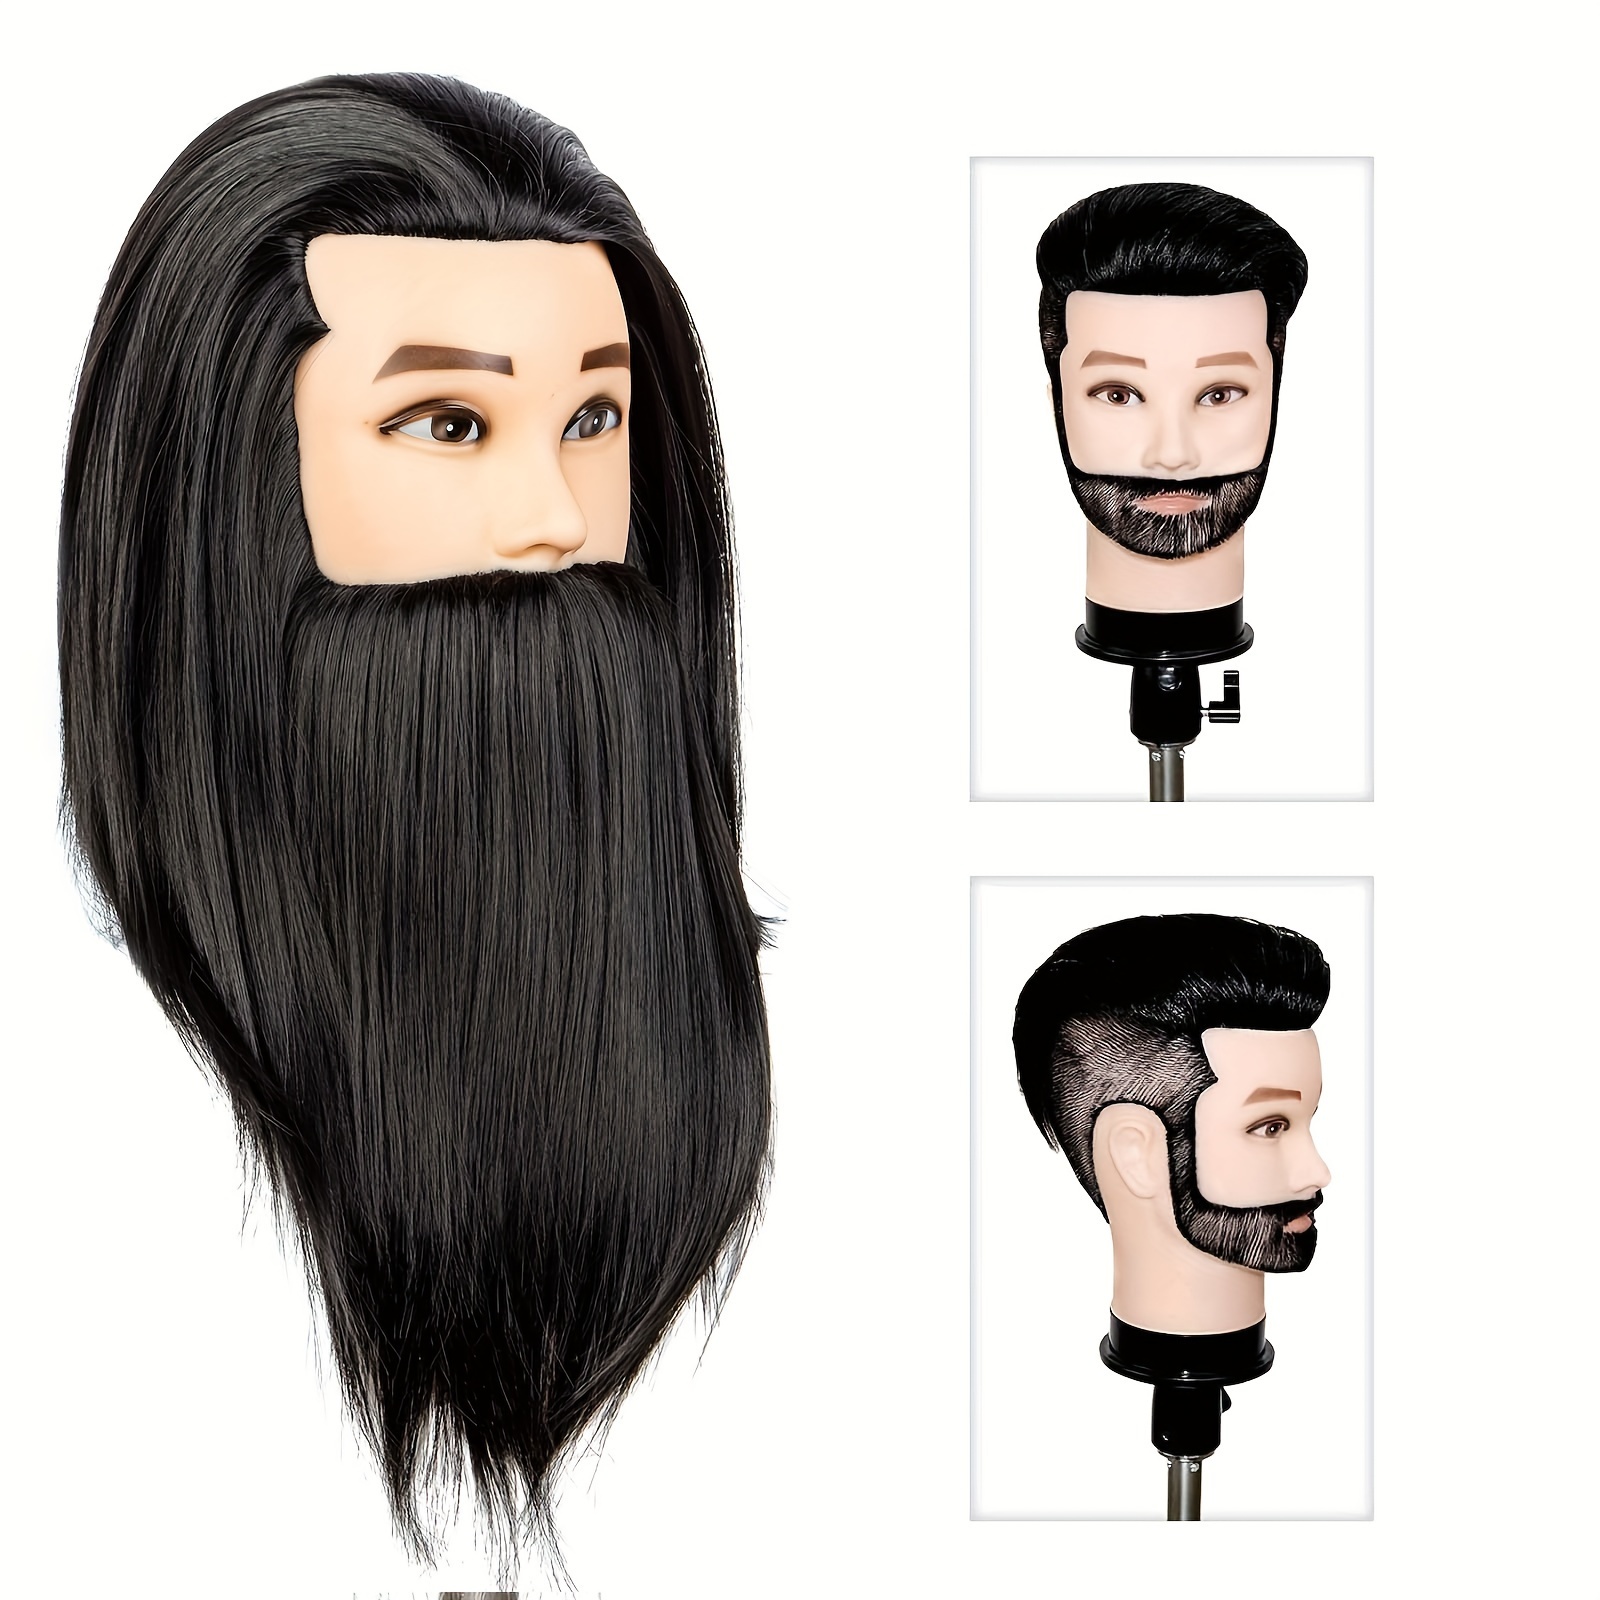 

Men's 16" Mannequin Head With Beard - Perfect For Hairdressing, Styling & Cosmetology Training - Durable Fiber, Black